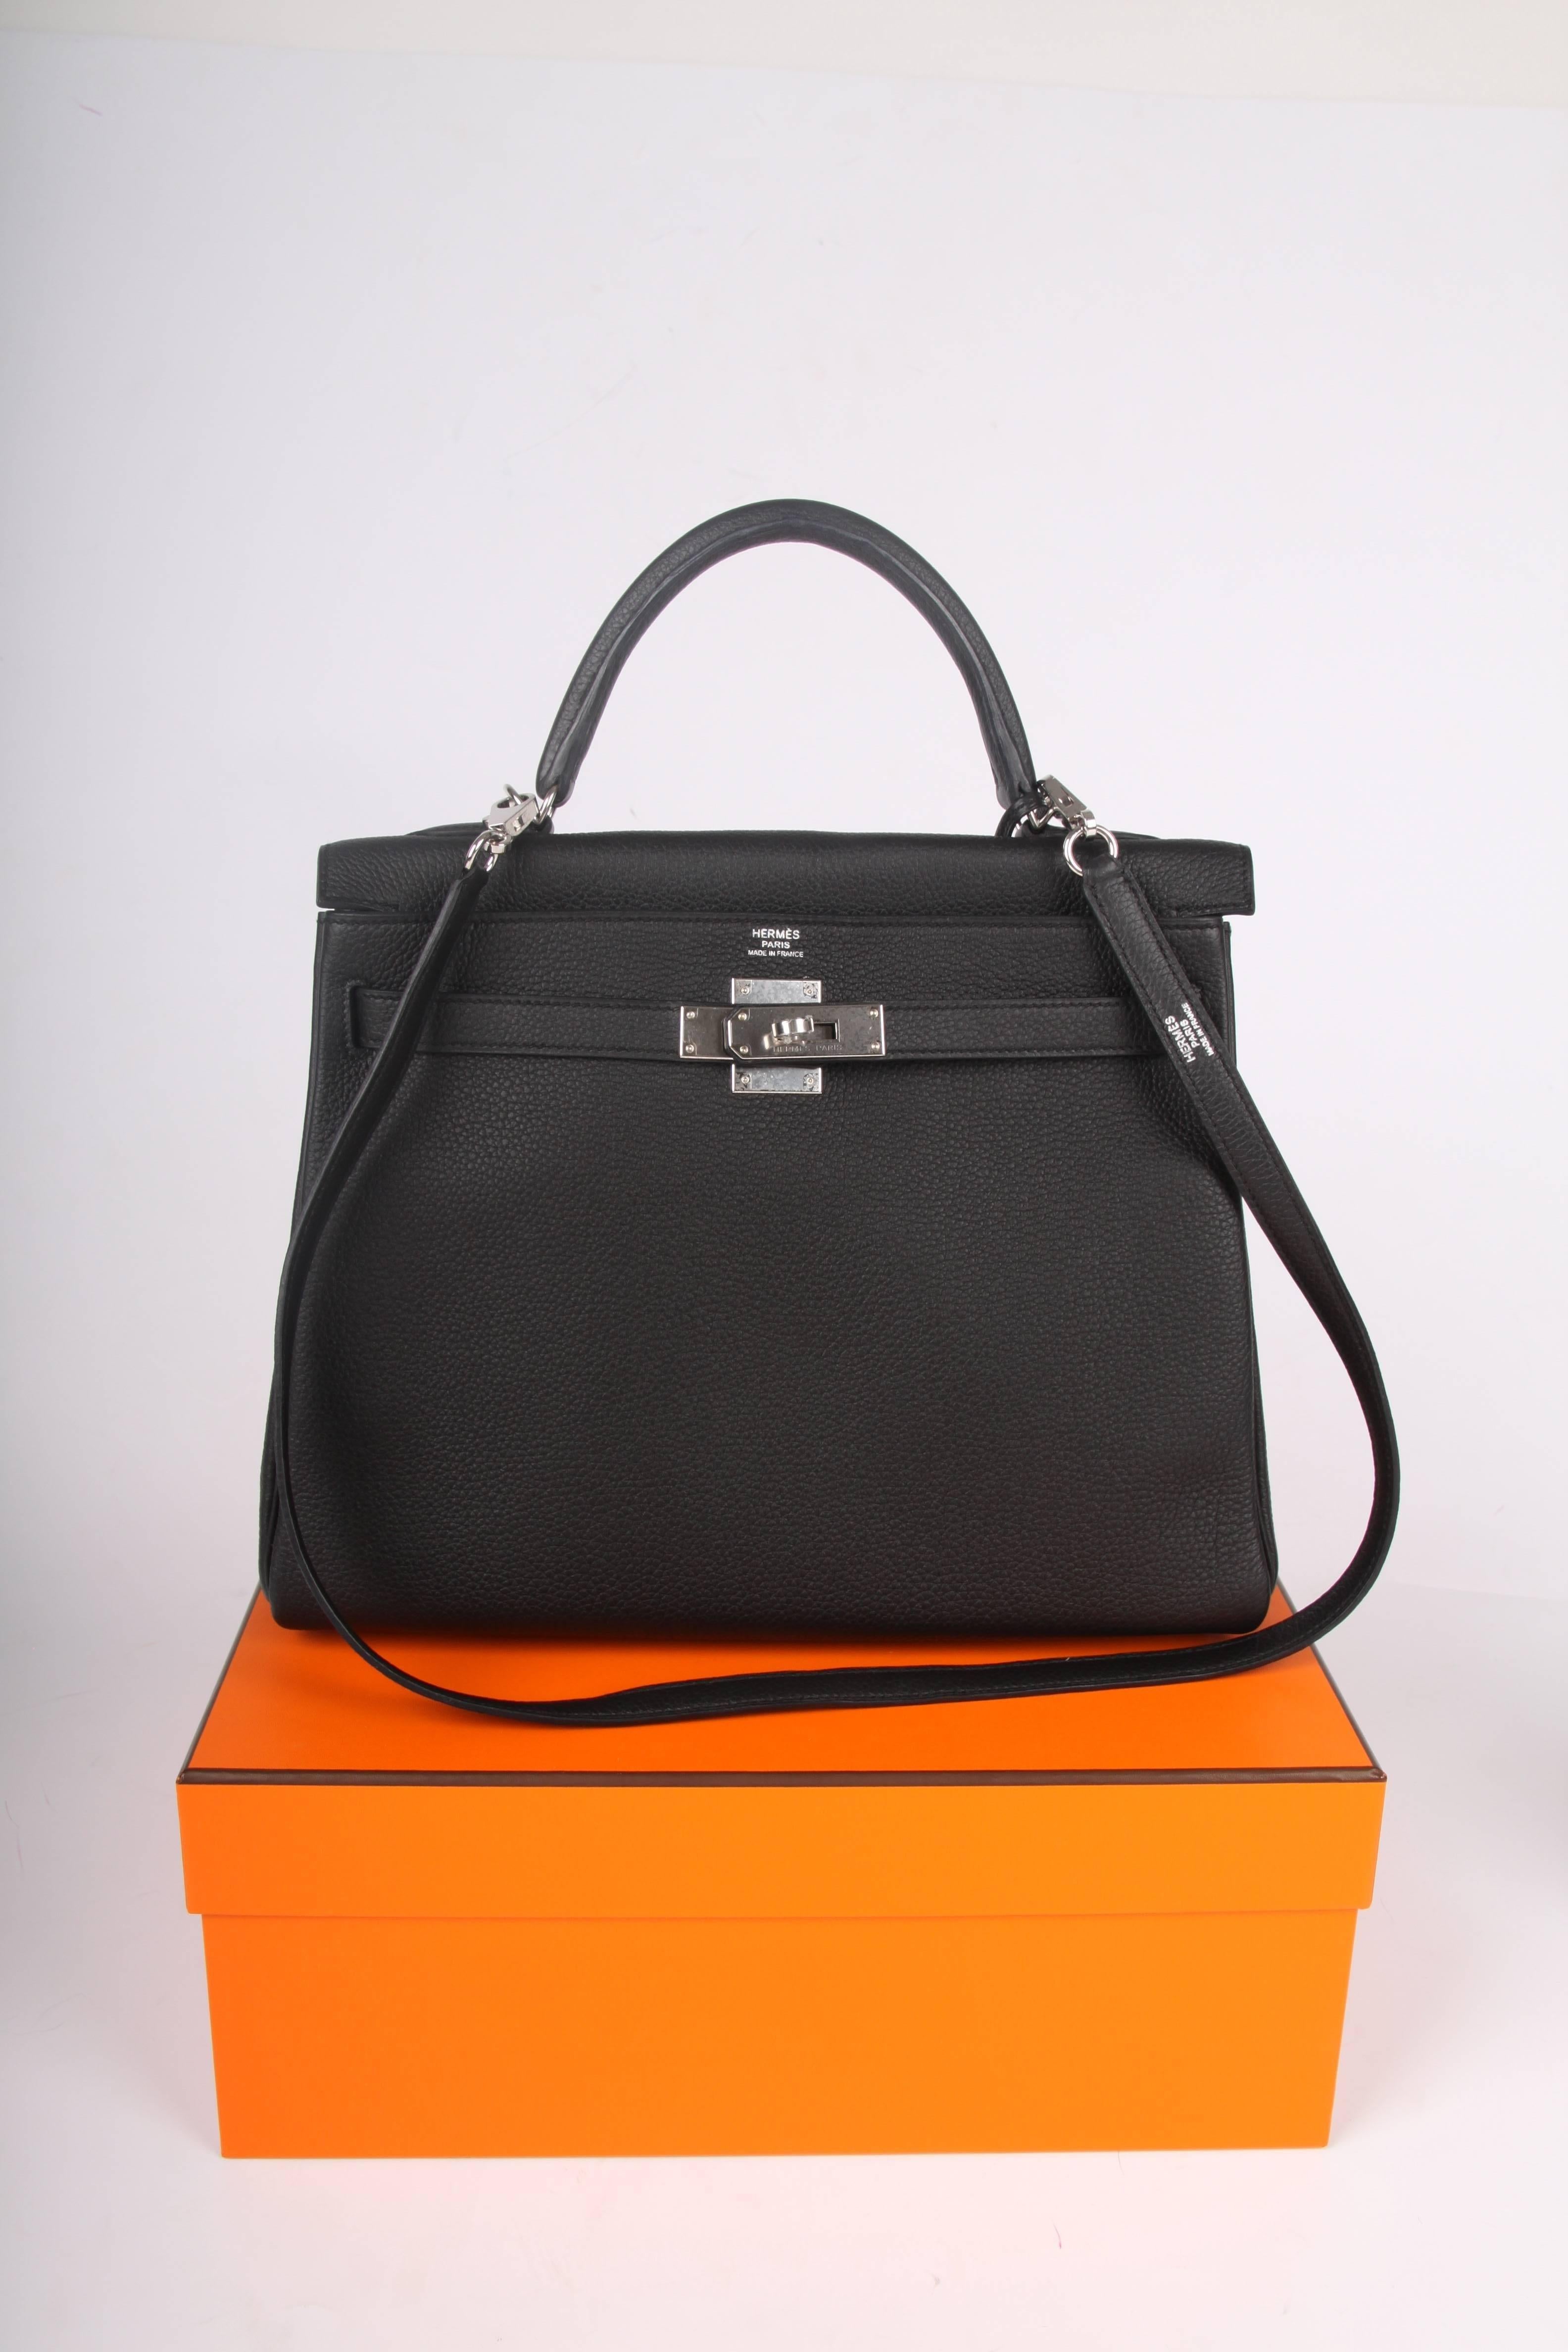 essss! Another beautiful Hermès bag in store! This is the Hermès Kelly 32 crafted of black Togo leather.

A collector's item, every bag is handcrafted in France and has numerous characteristics. 

Traditionally an alphabetic character is given to